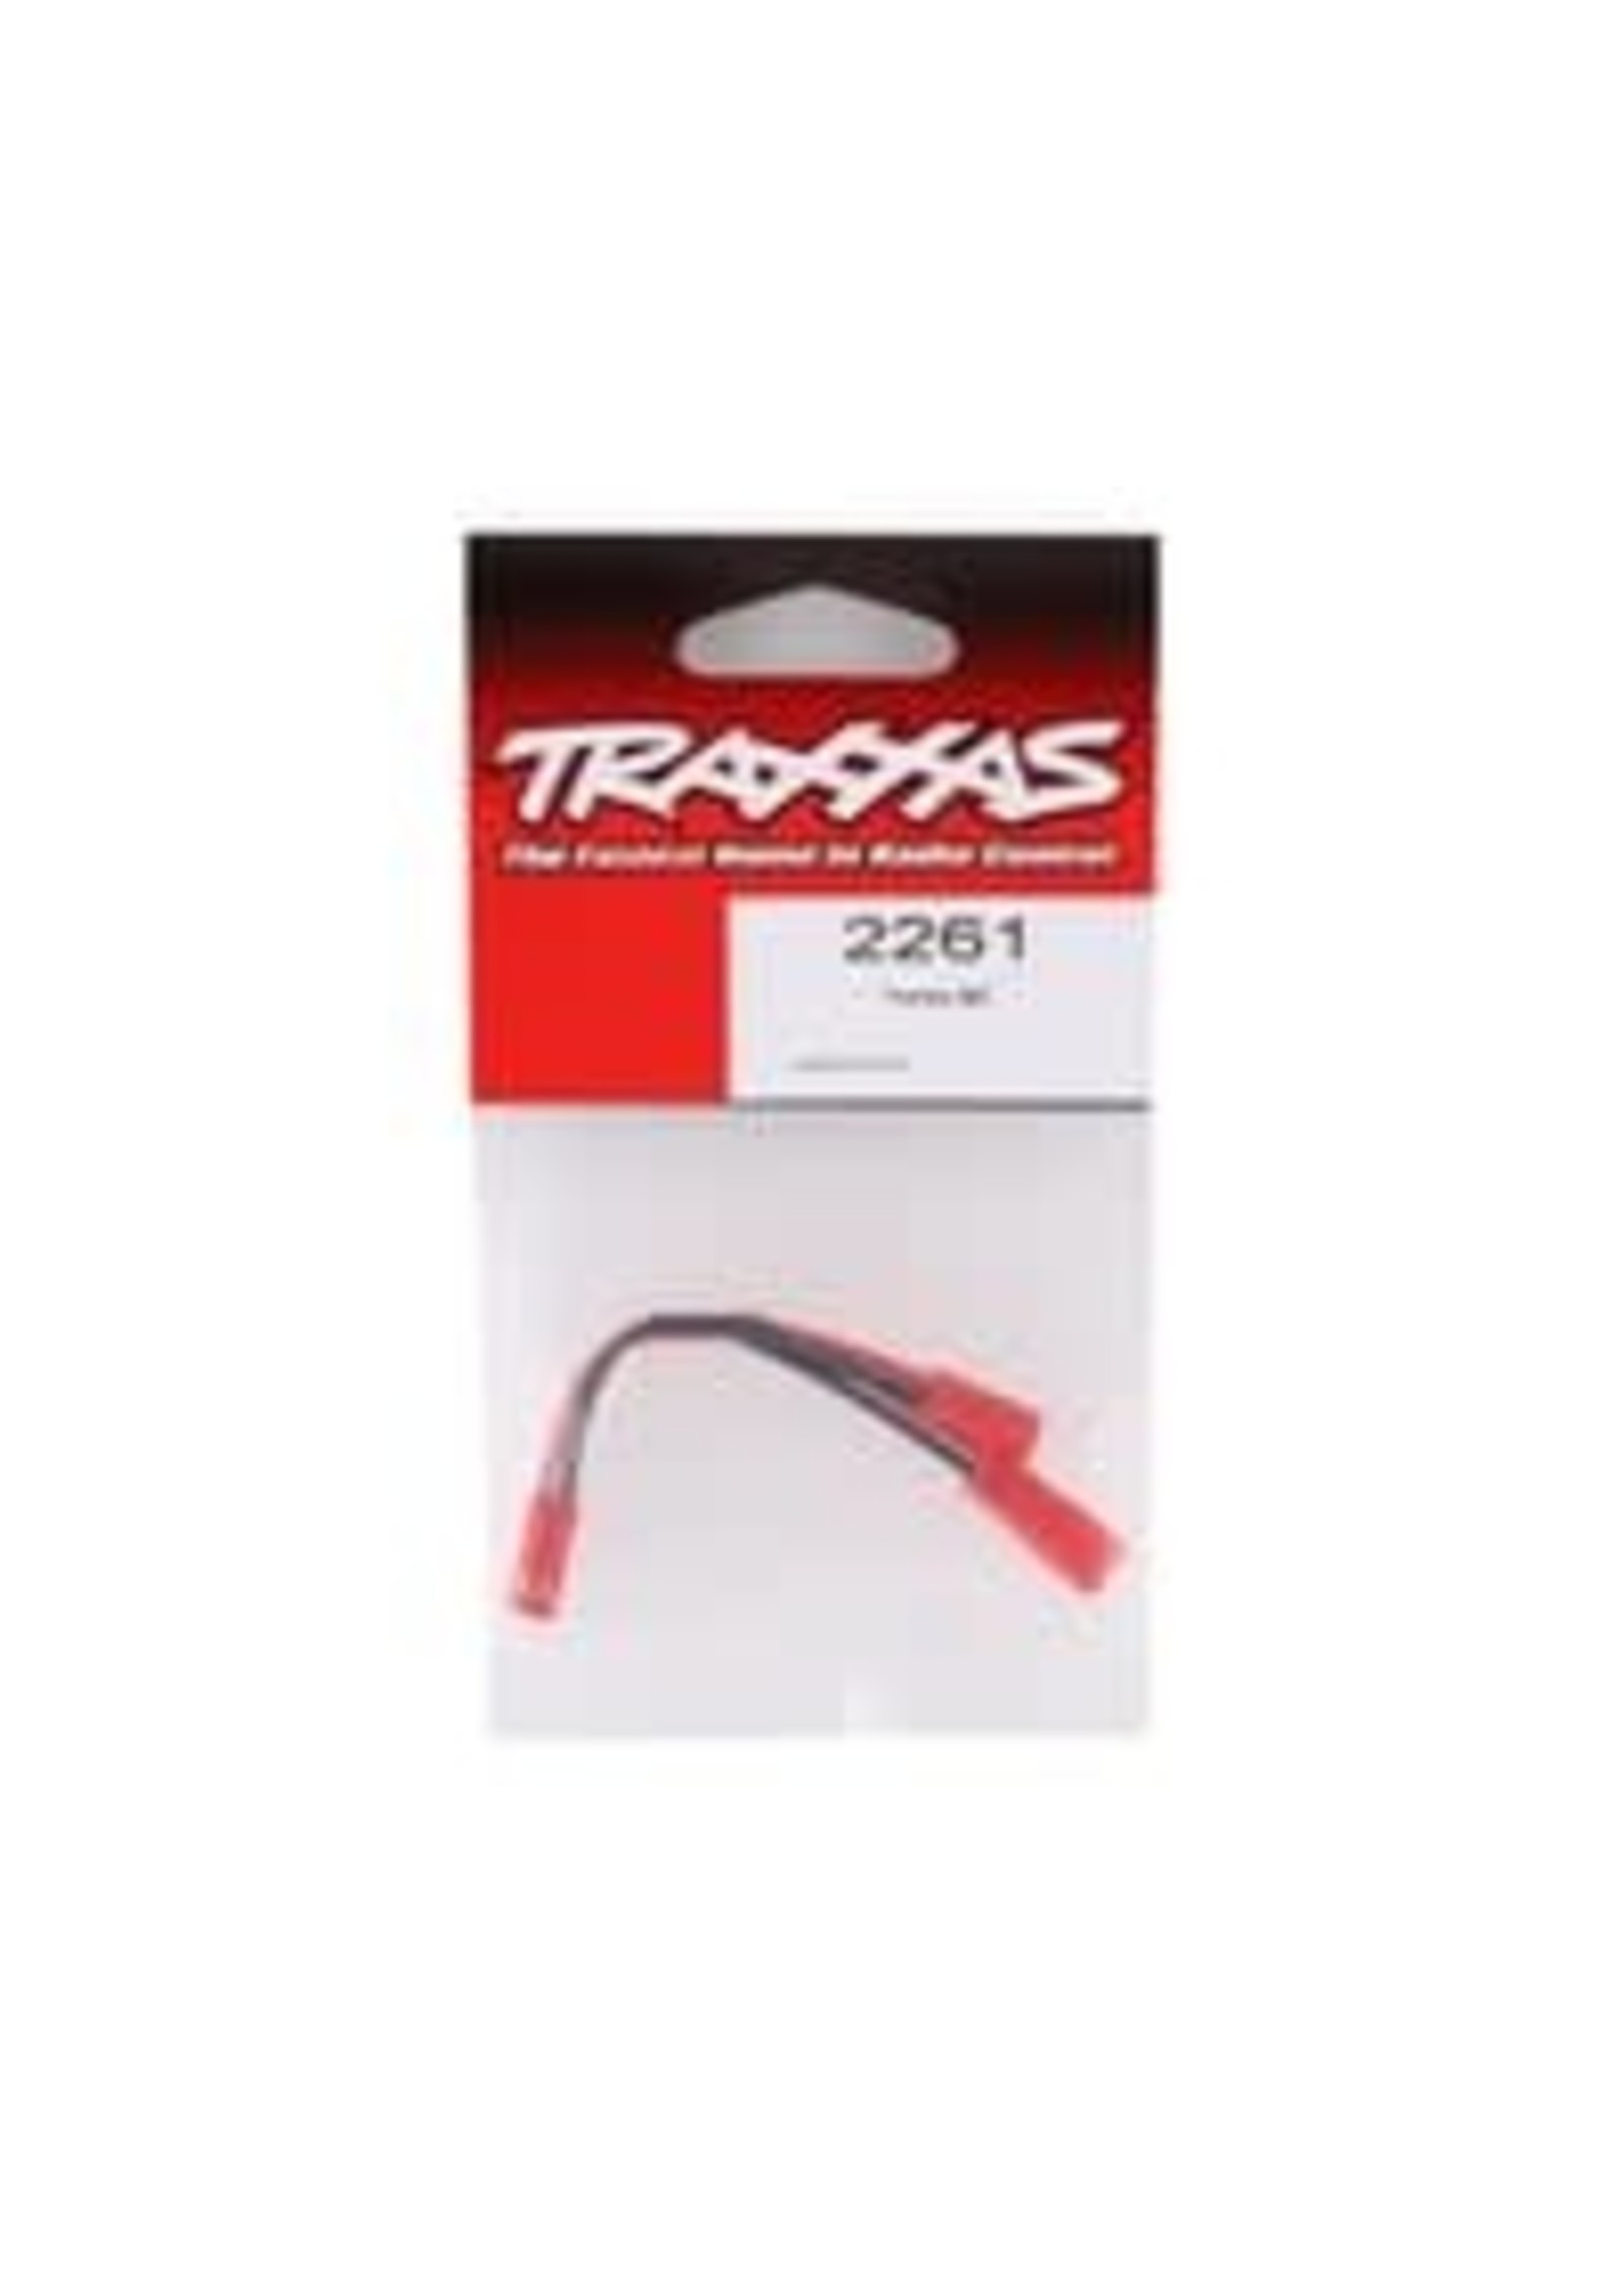 Traxxas 2261 Y-harness, BEC